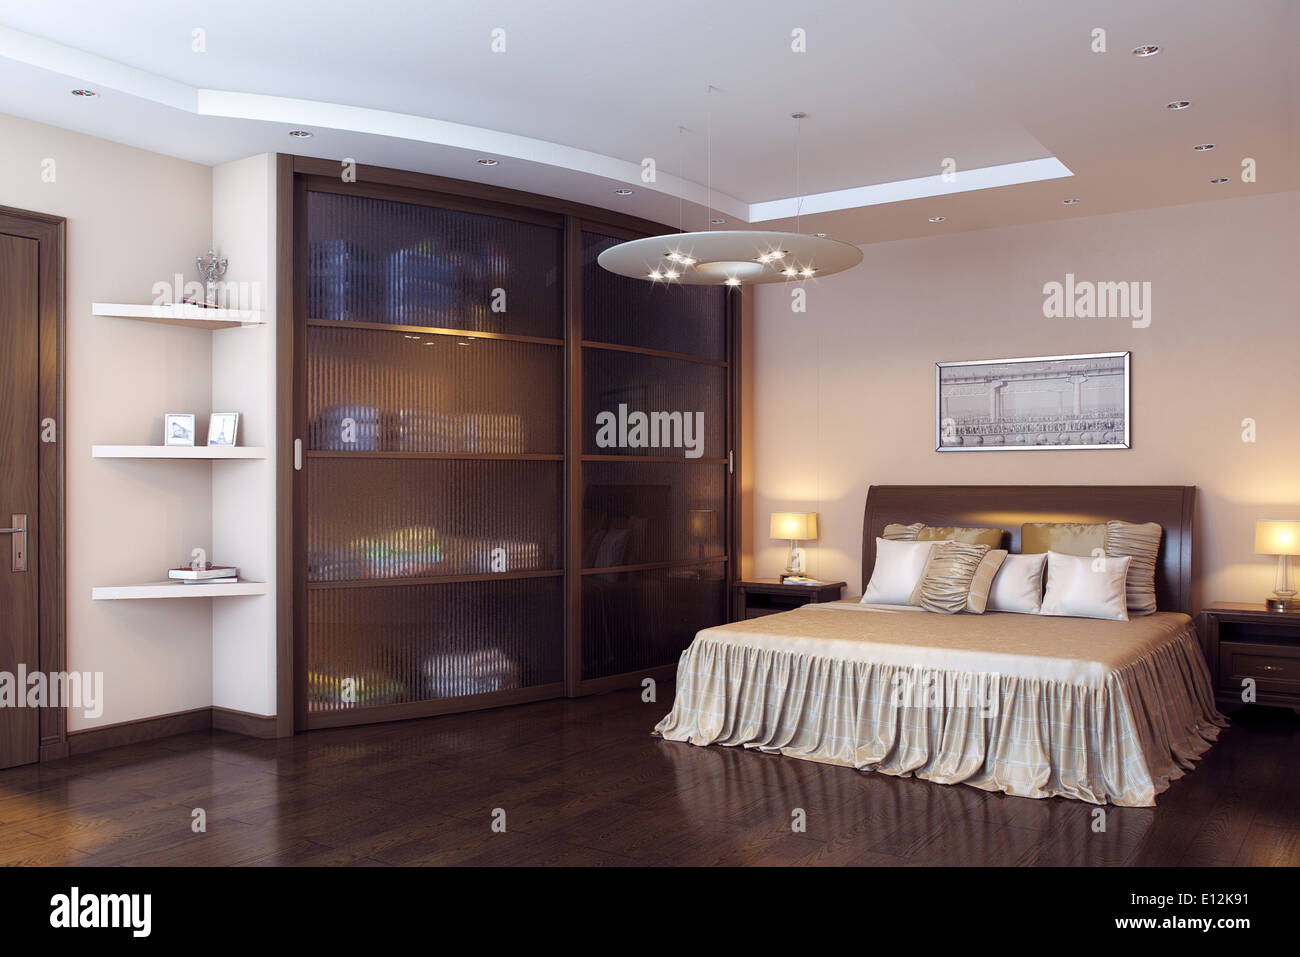 3d Rendering Illustration Of Big Spacious Bedroom In Soft Light Stock Photo Picture And Royalty Free Image Image 73599297